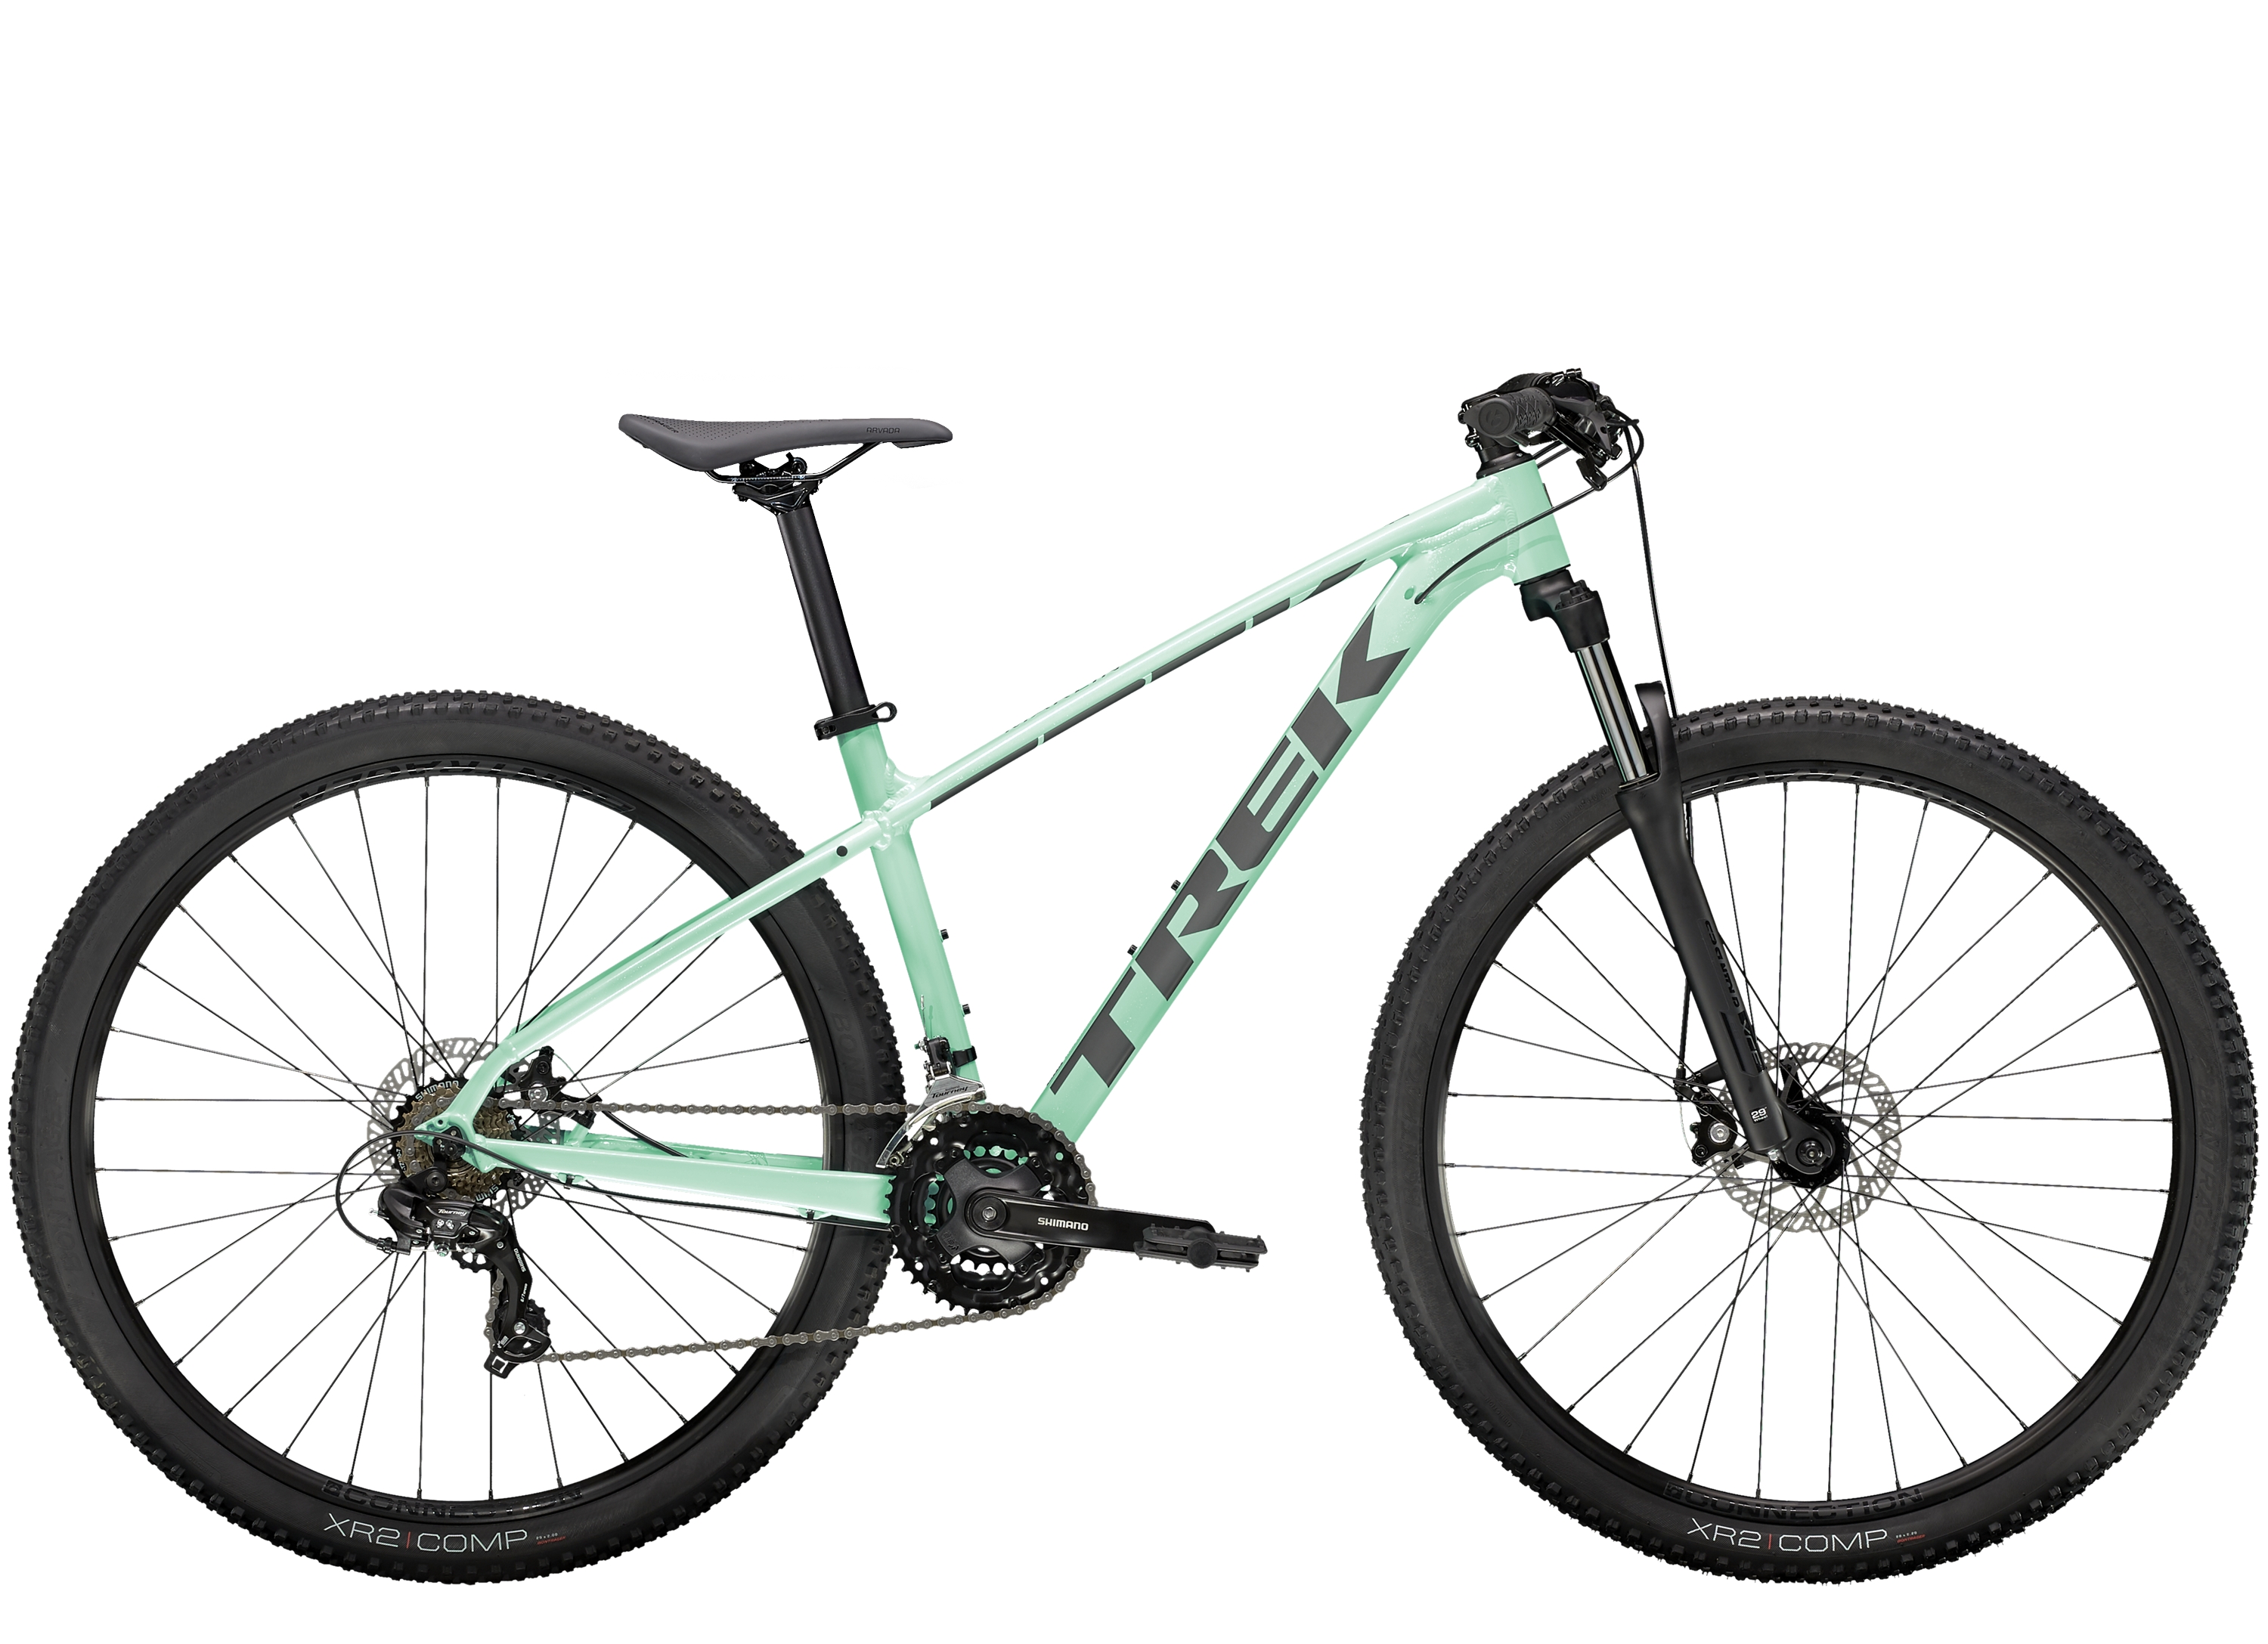 <a href="https://cycles-clement.be/product/marlin-4-m-29-voodoo-aloha-green/">MARLIN 4 M 29 VOODOO ALOHA GREEN</a>